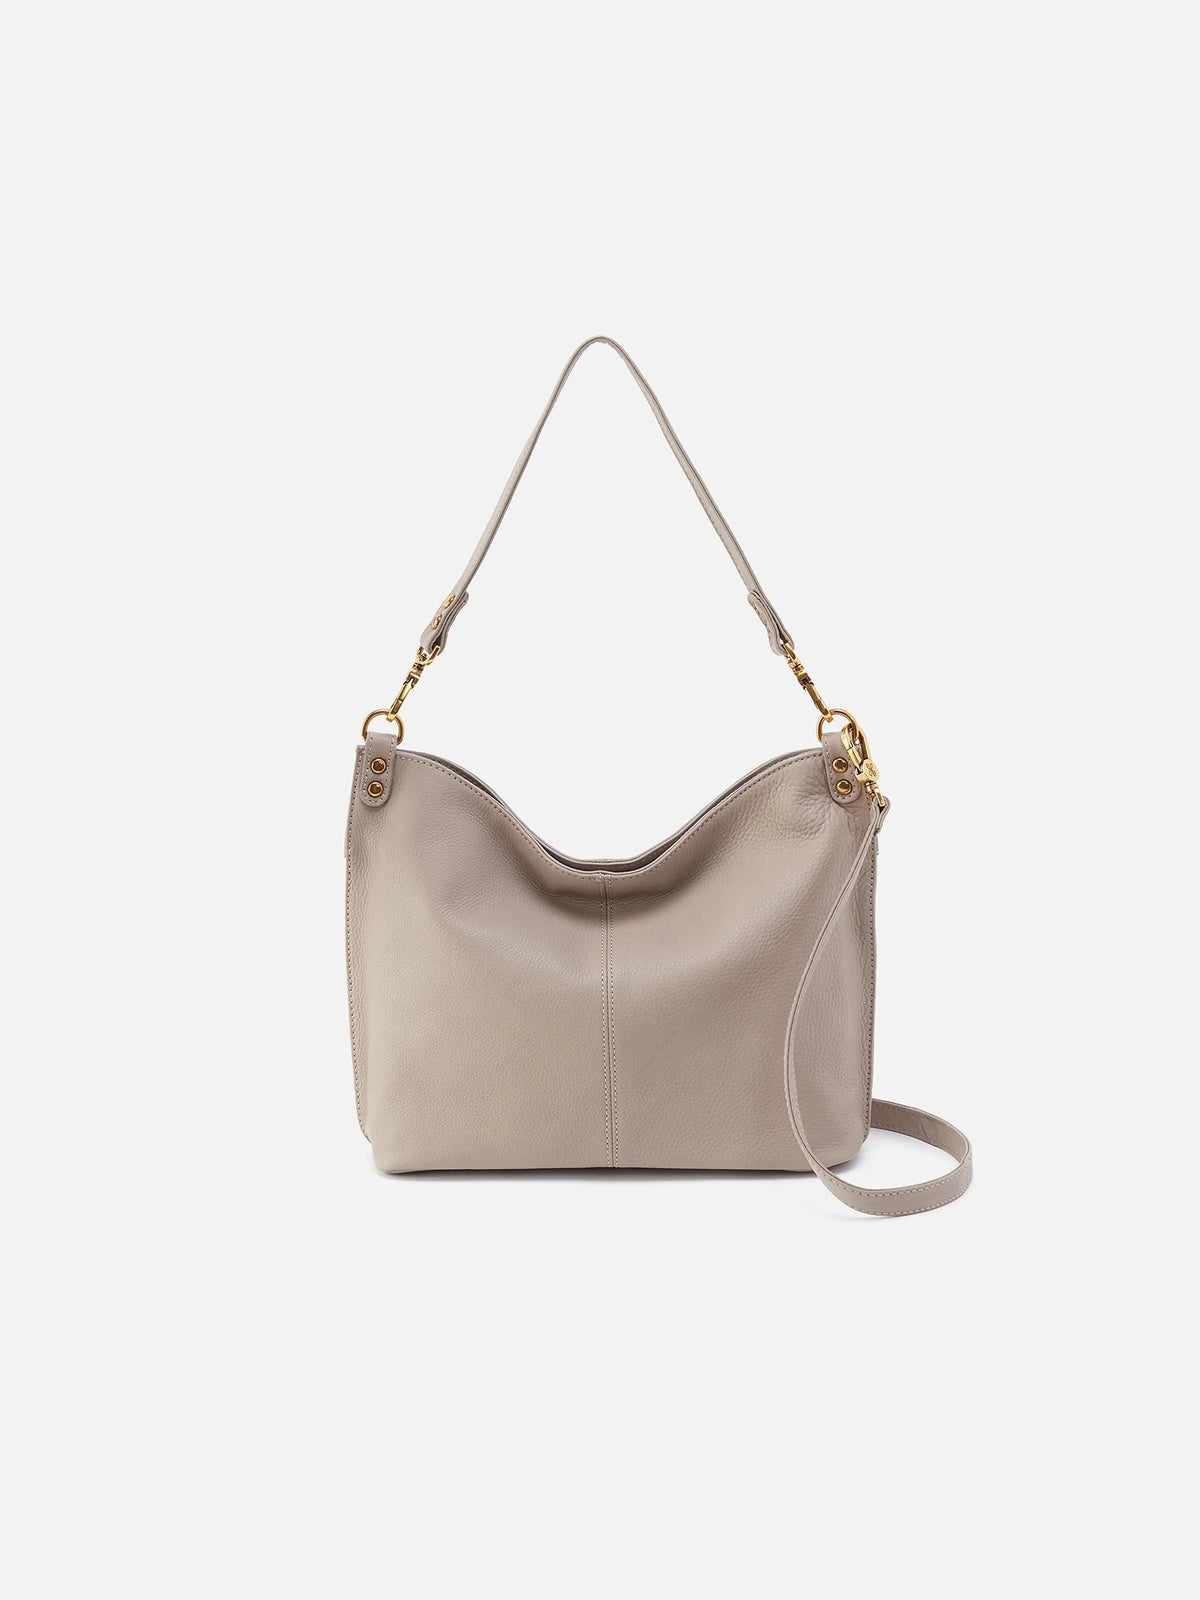 hobo pier shoulder bag in taupe-front view